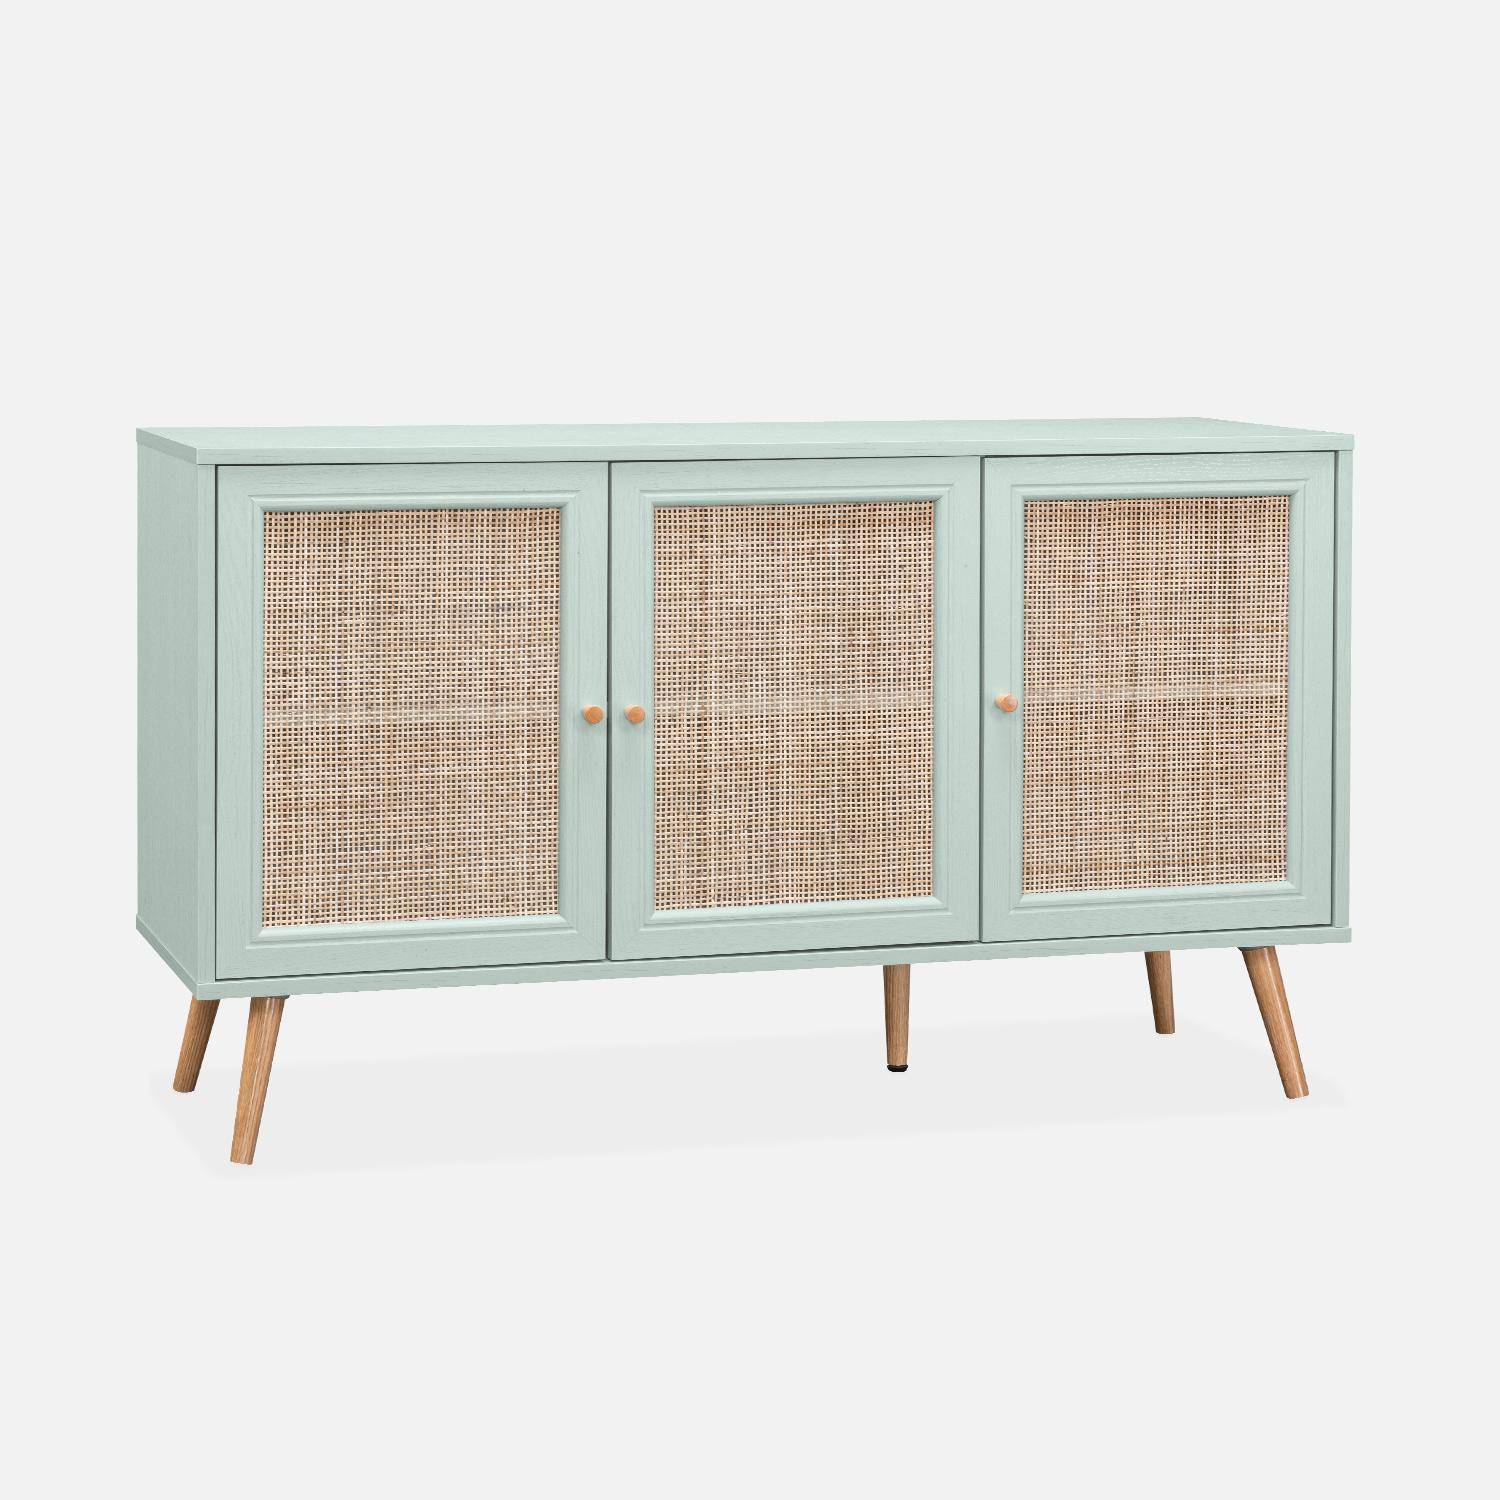 Wooden and cane rattan detail sideboard with 3 doors, 2 shelves, Scandi-style legs, 120x39x70cm - Boheme - Pastel Green Photo3